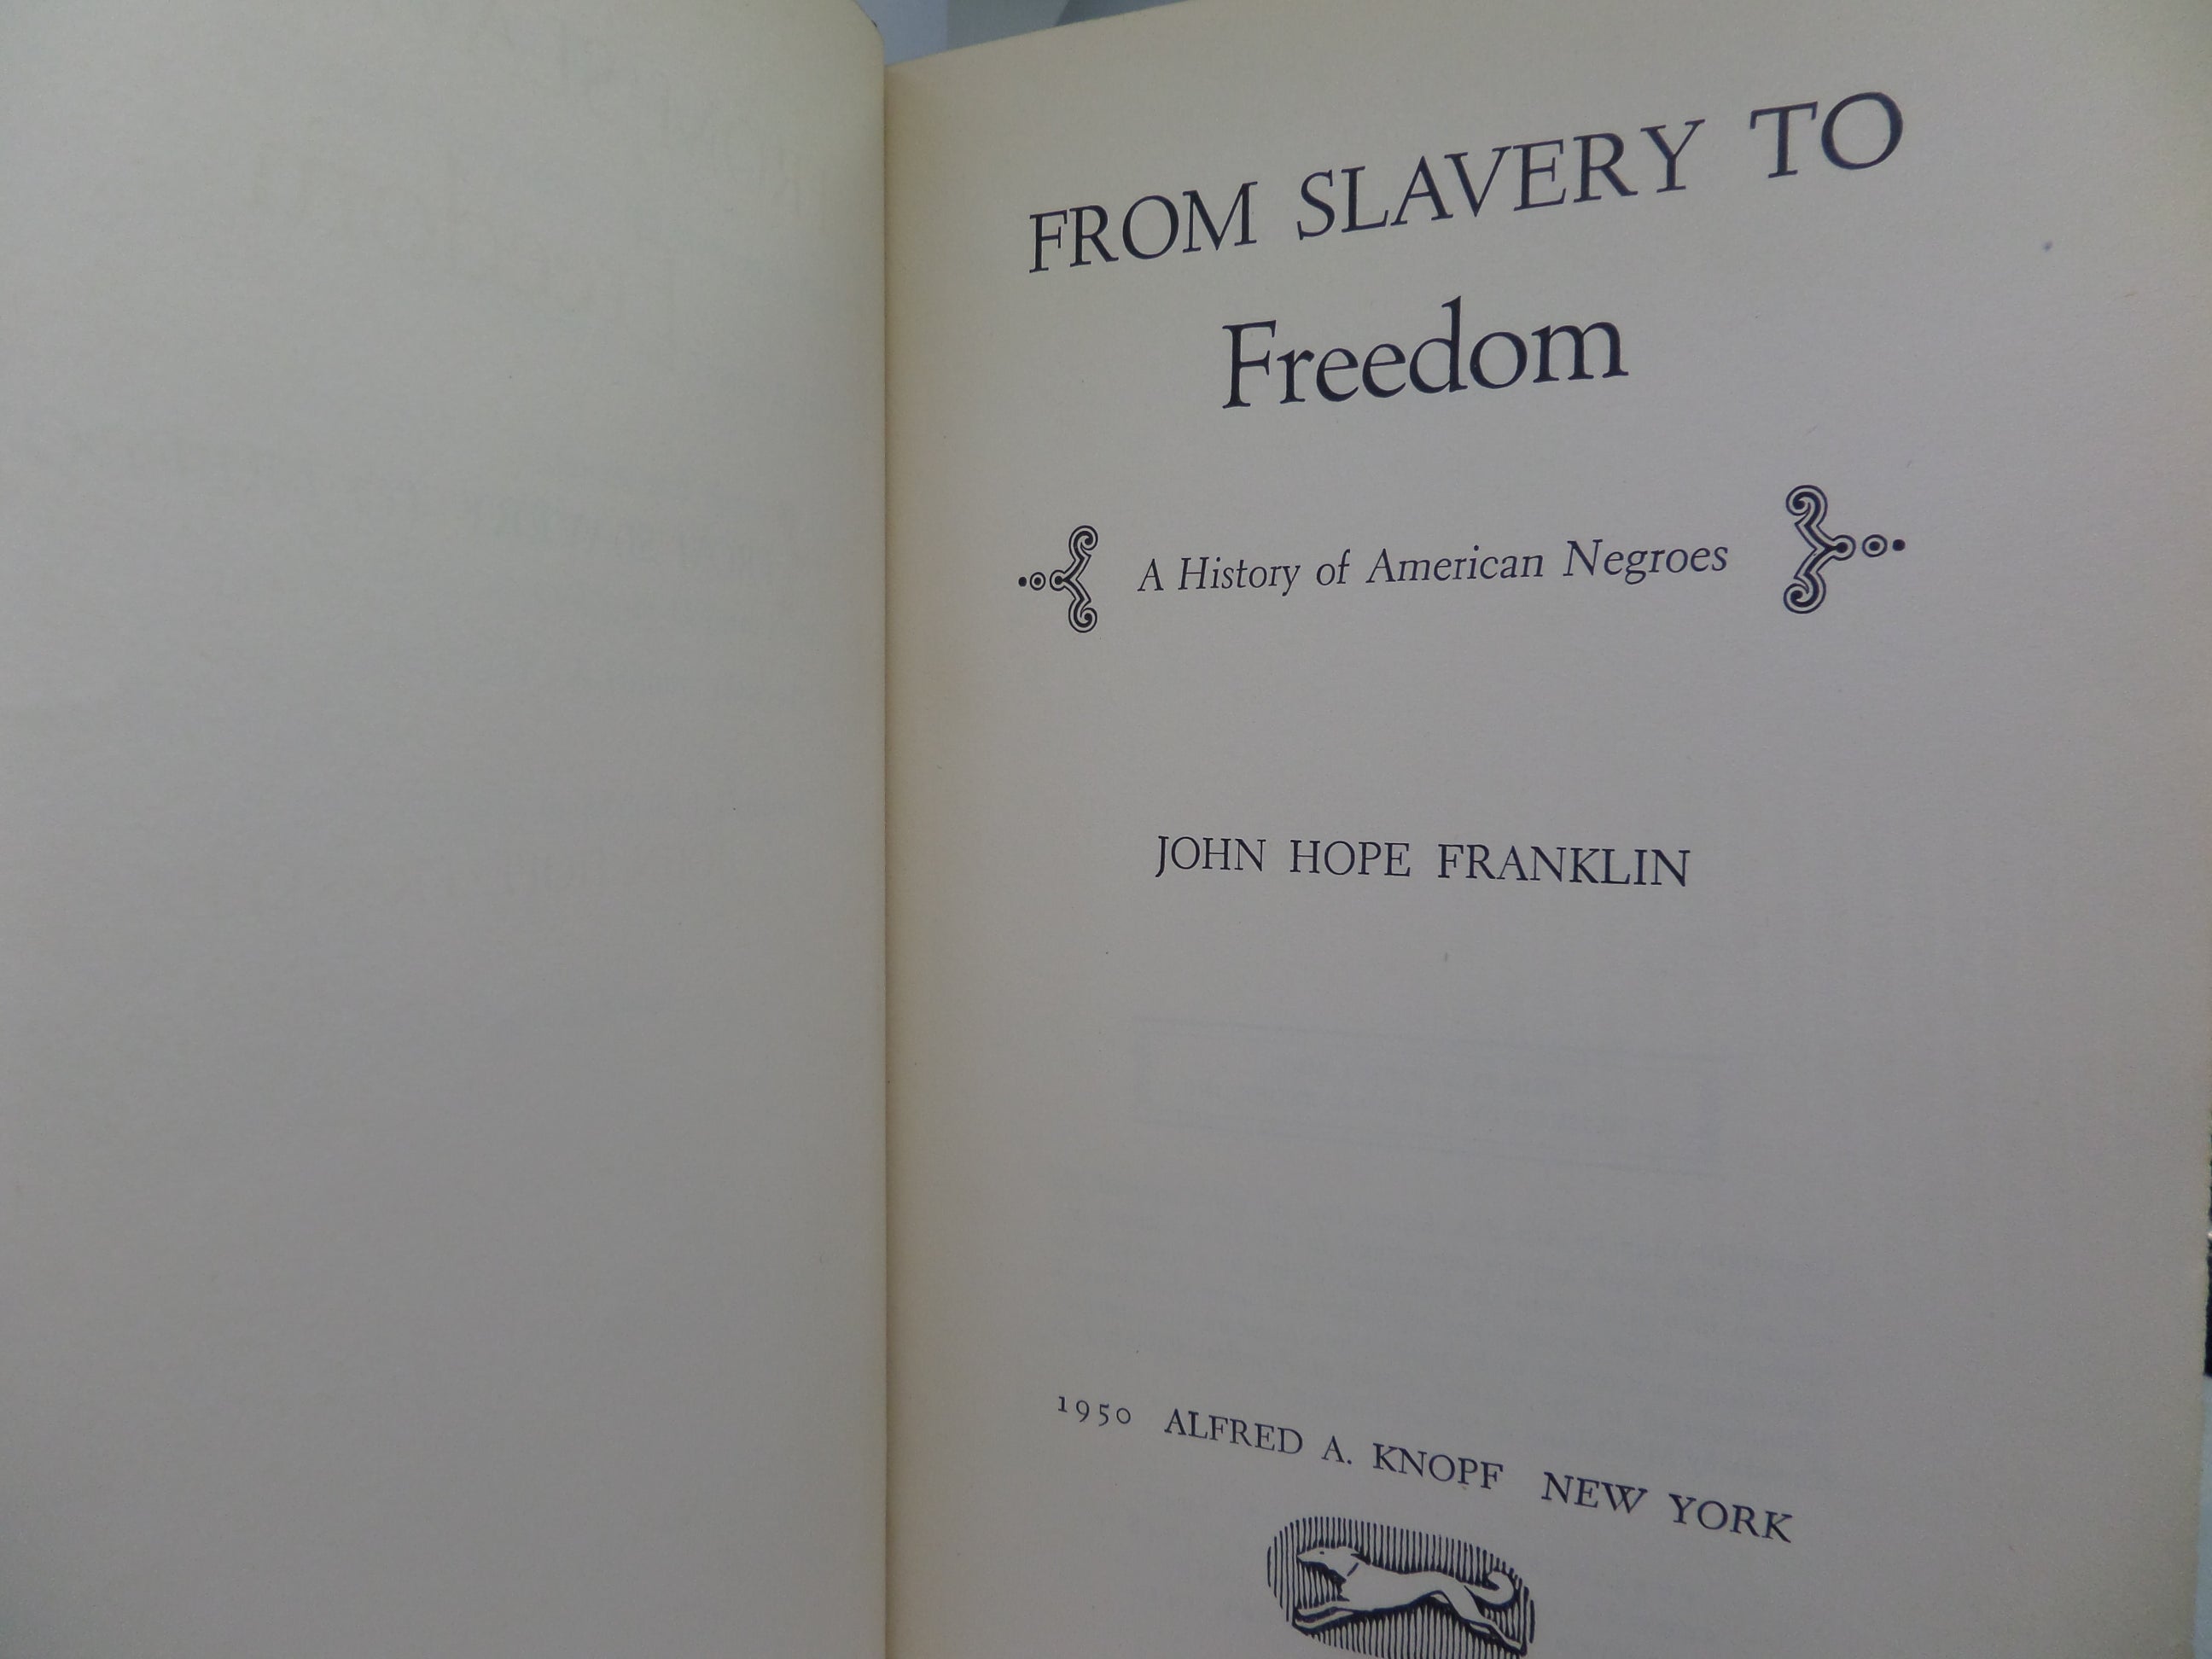 FROM SLAVERY TO FREEDOM: A HISTORY OF AMERICAN NEGROES BY JOHN FRANKLIN 1950